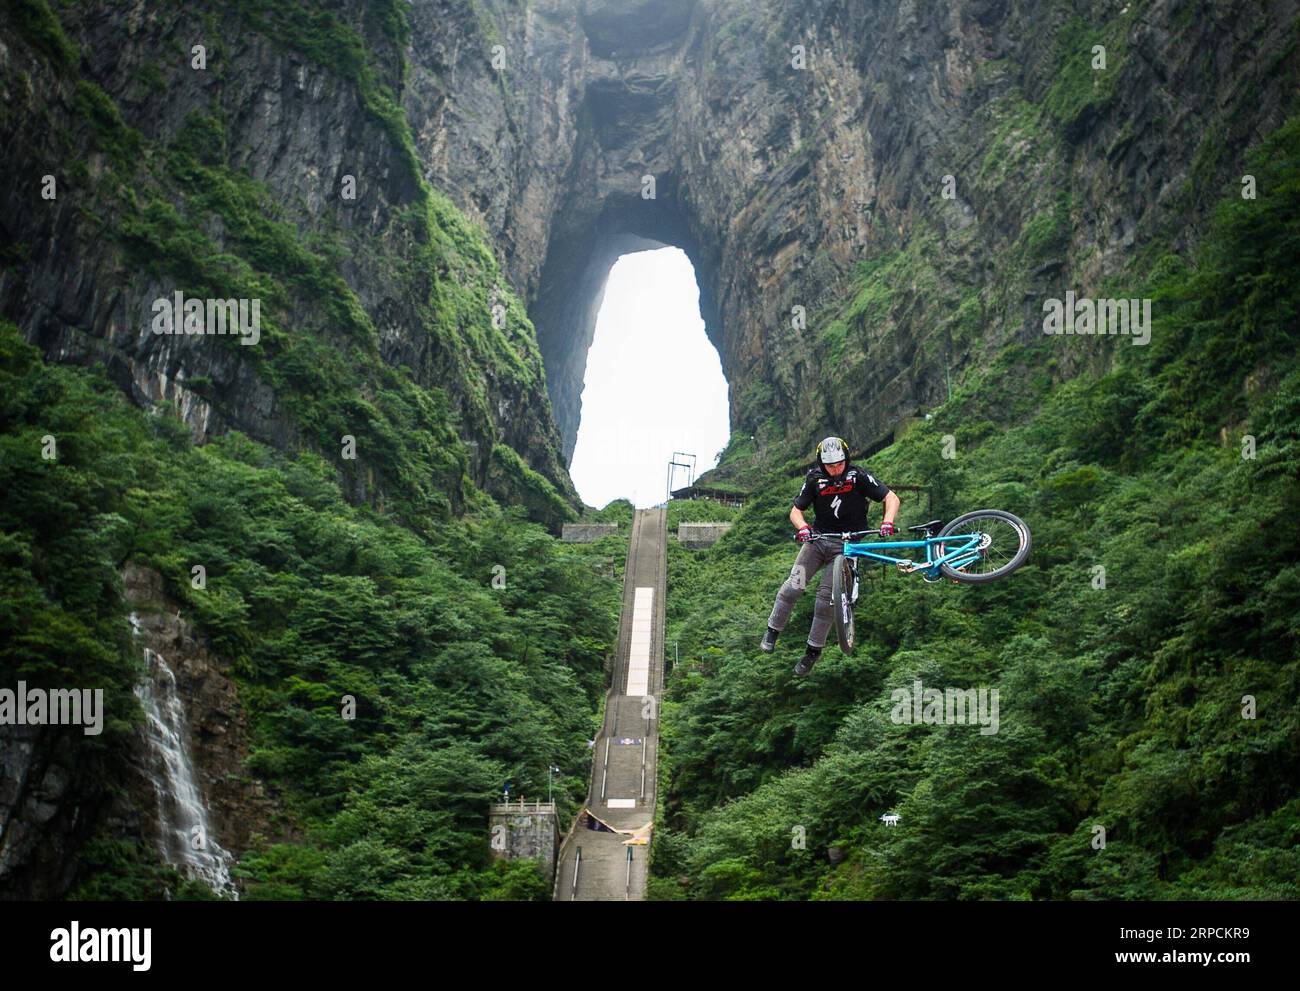 (190708) -- BEIJING, July 8, 2019 -- Nicholi Rogatkin from the United States competes during the 2nd Red Bull Sky Gate race held in Zhangjiajie, central China s Hunan Province, July 16, 2016. Located in central China, Hunan Province is well-known for its varied topography. It abuts the Dongting Lake to the north, and the east, south and west sides of the province are surrounded by mountains, with Wuling and Xuefeng Mountains to the west, Nanling Mountain to the south, Luoxiao and Mufu Mountains to the east. The Xiangjiang, Zijiang, Yuanjiang and Lishui Rivers converge on the Yangtze River at t Stock Photo